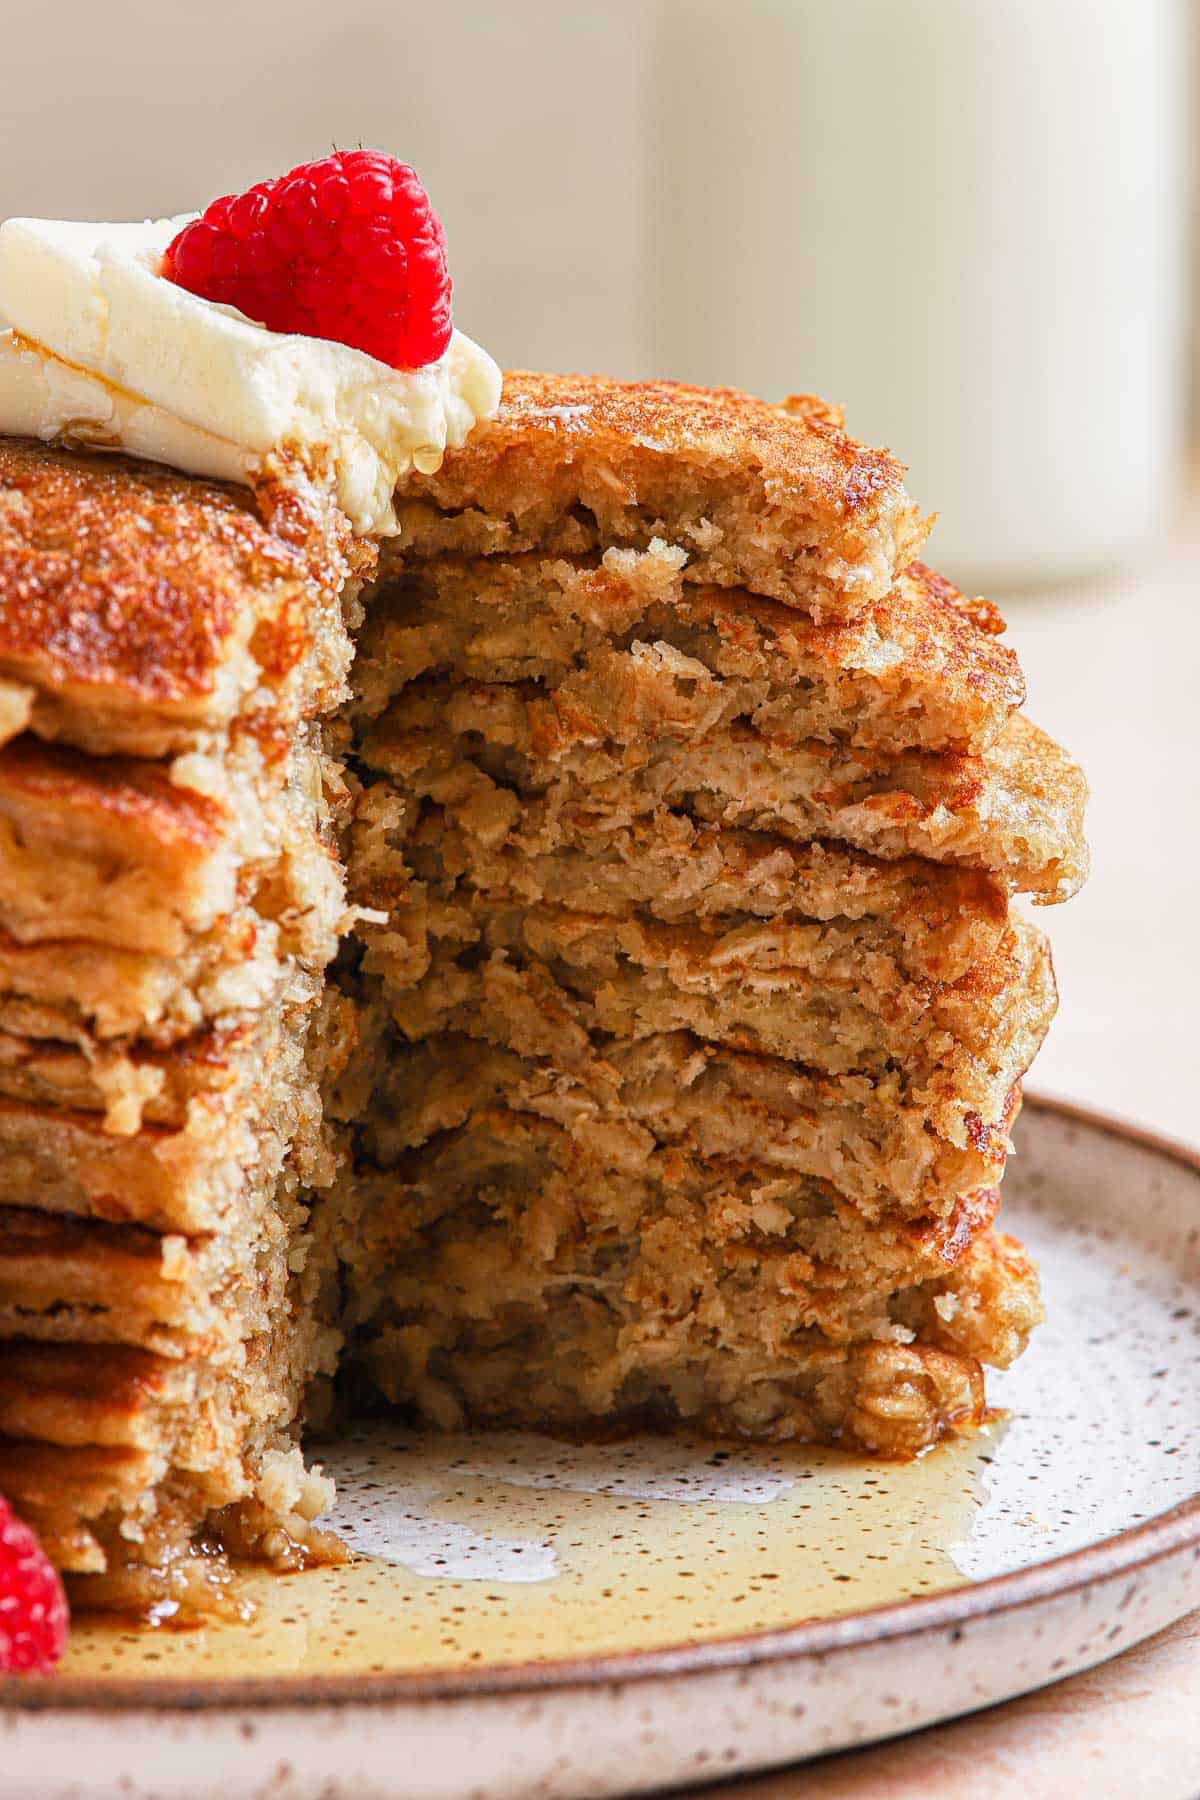 Tall stack of oatmeal pancakes with a quarter cut out covered in butter and syrup.